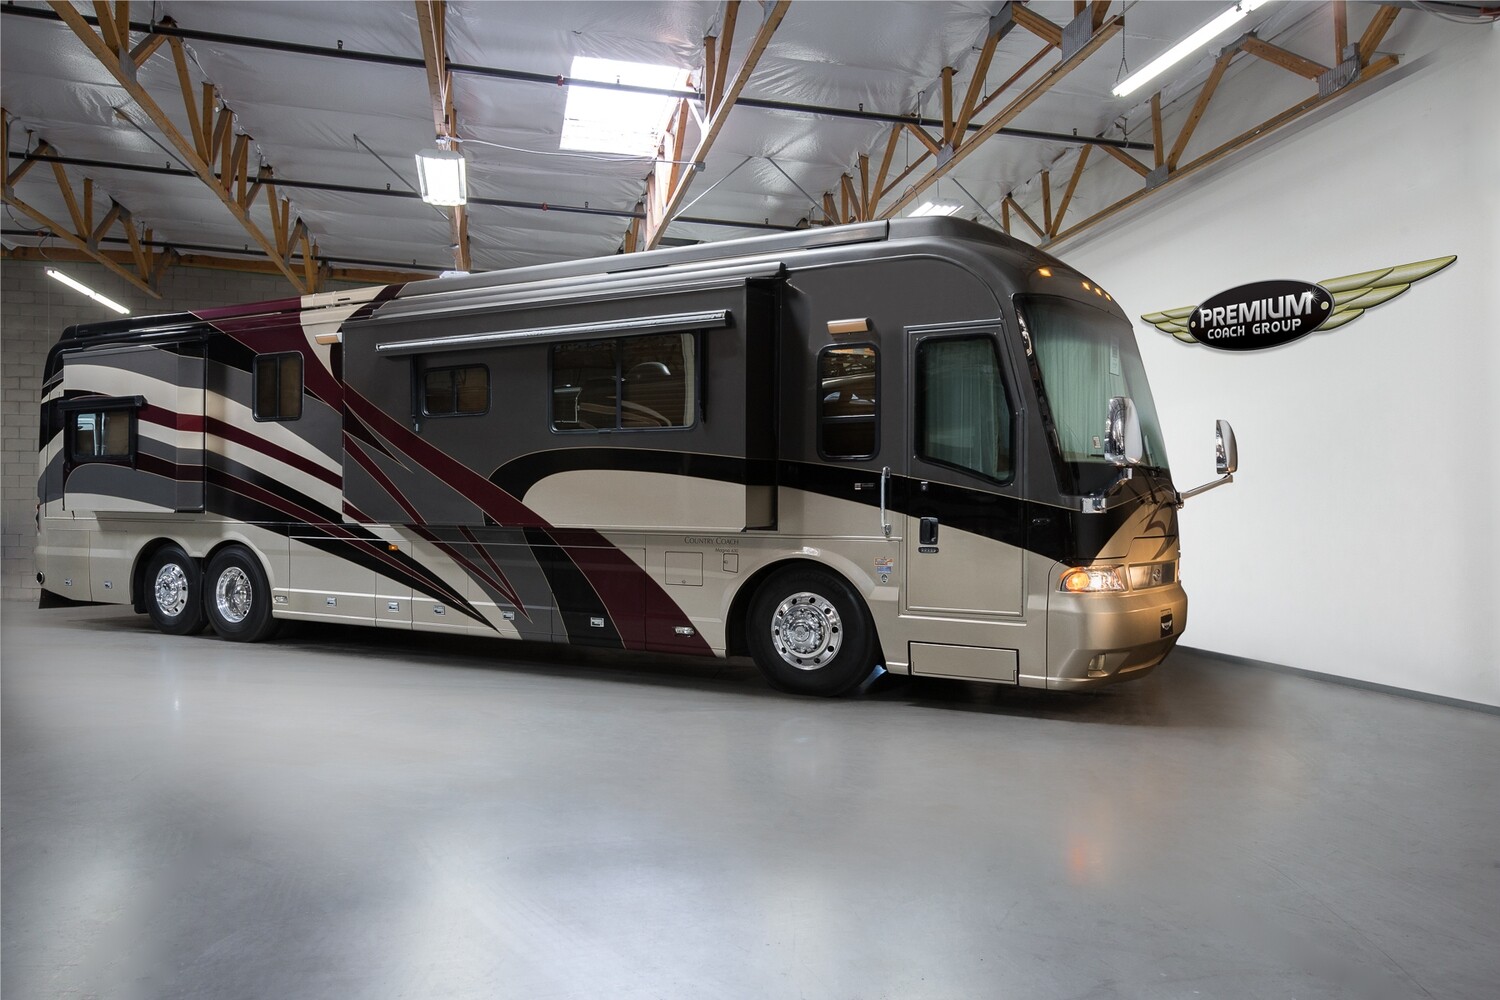 2006 COUNTRY COACHMAGNA REMBRANDT 630